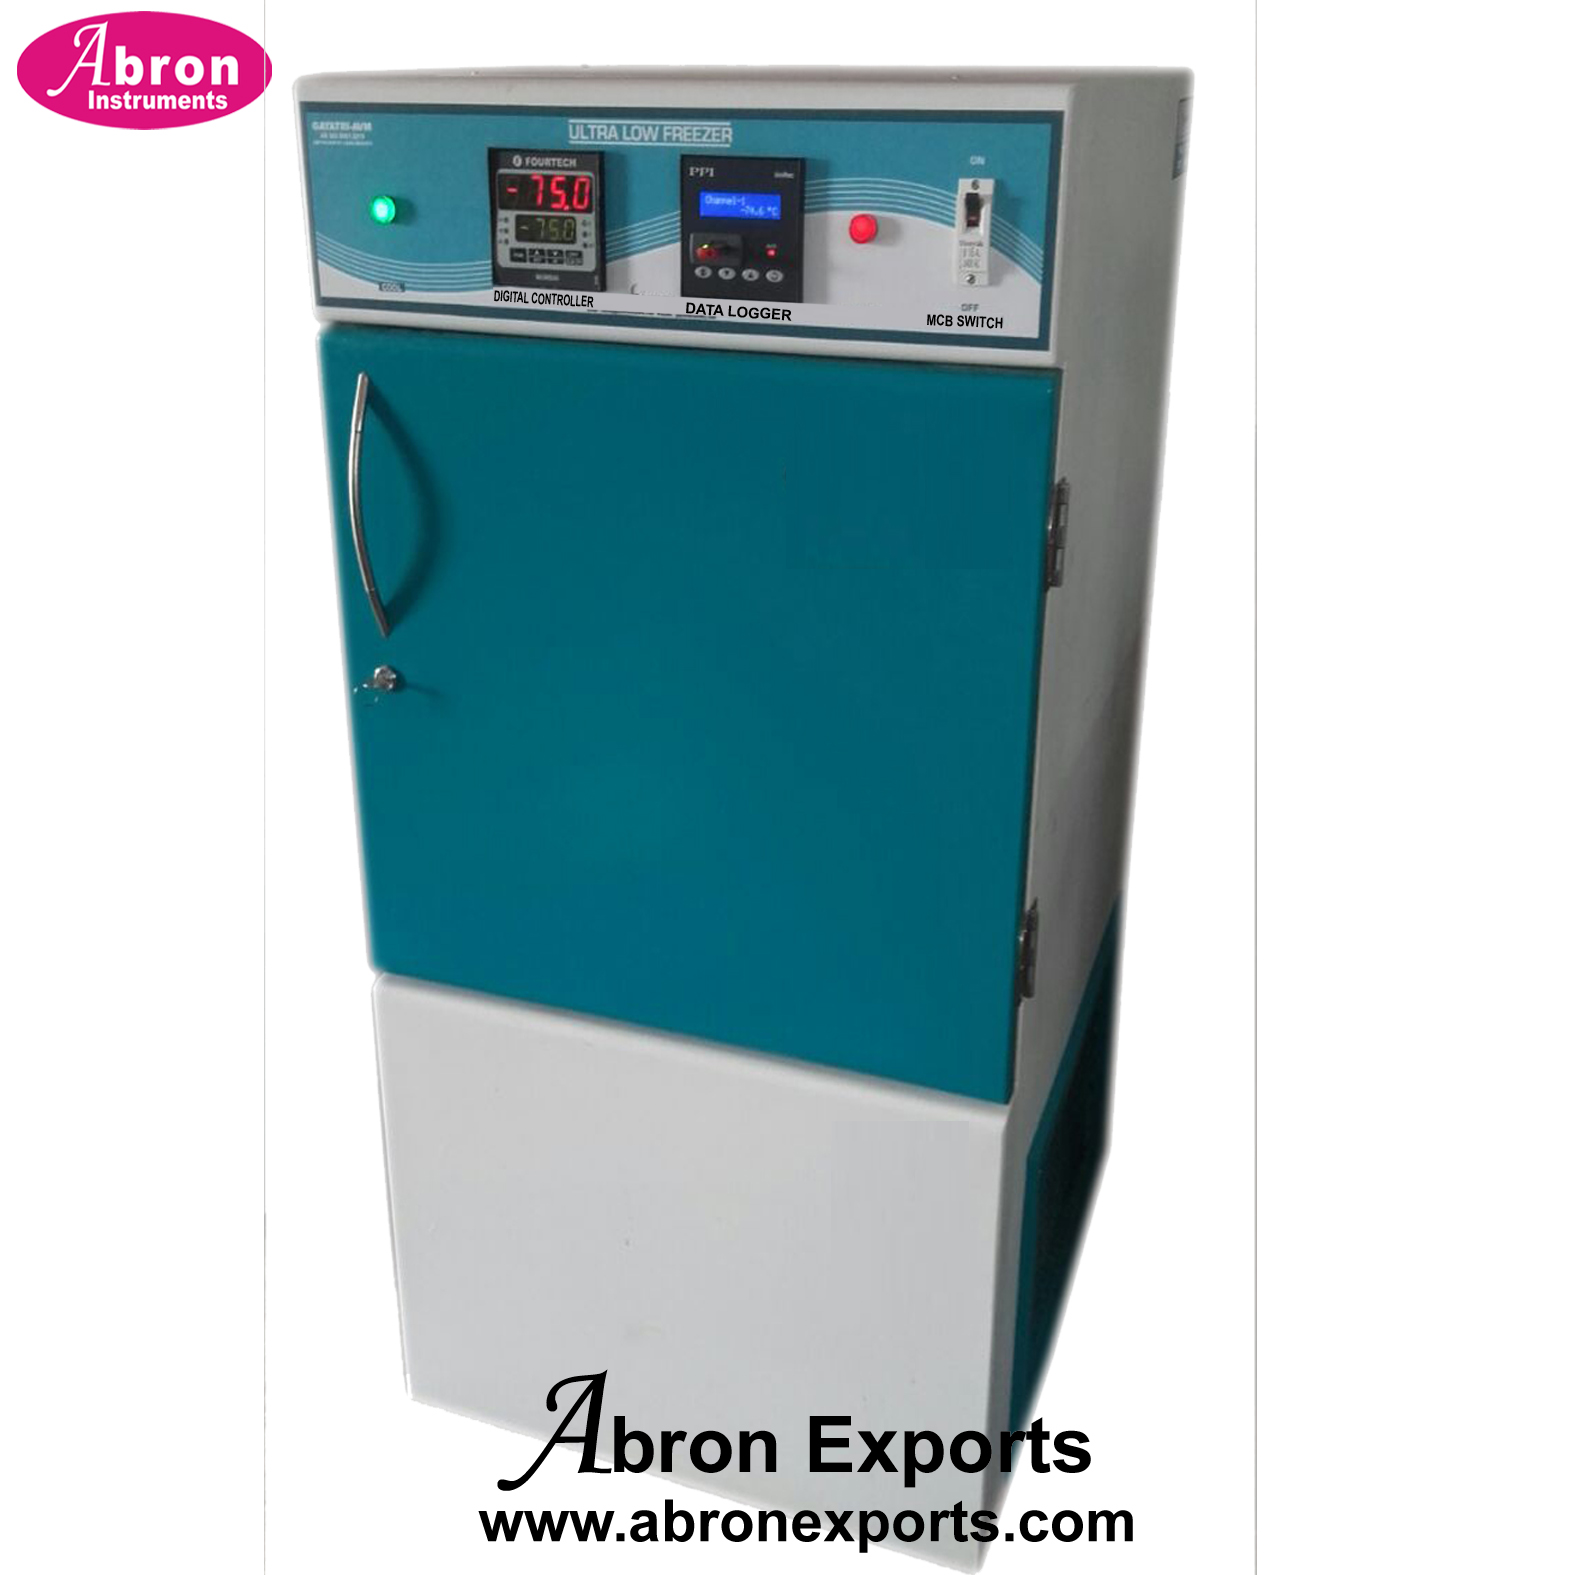 Ultra low deep freezer Oven digital -80C temperature Vertical cooling ss chamber trays Abron ABM-2691UV80 